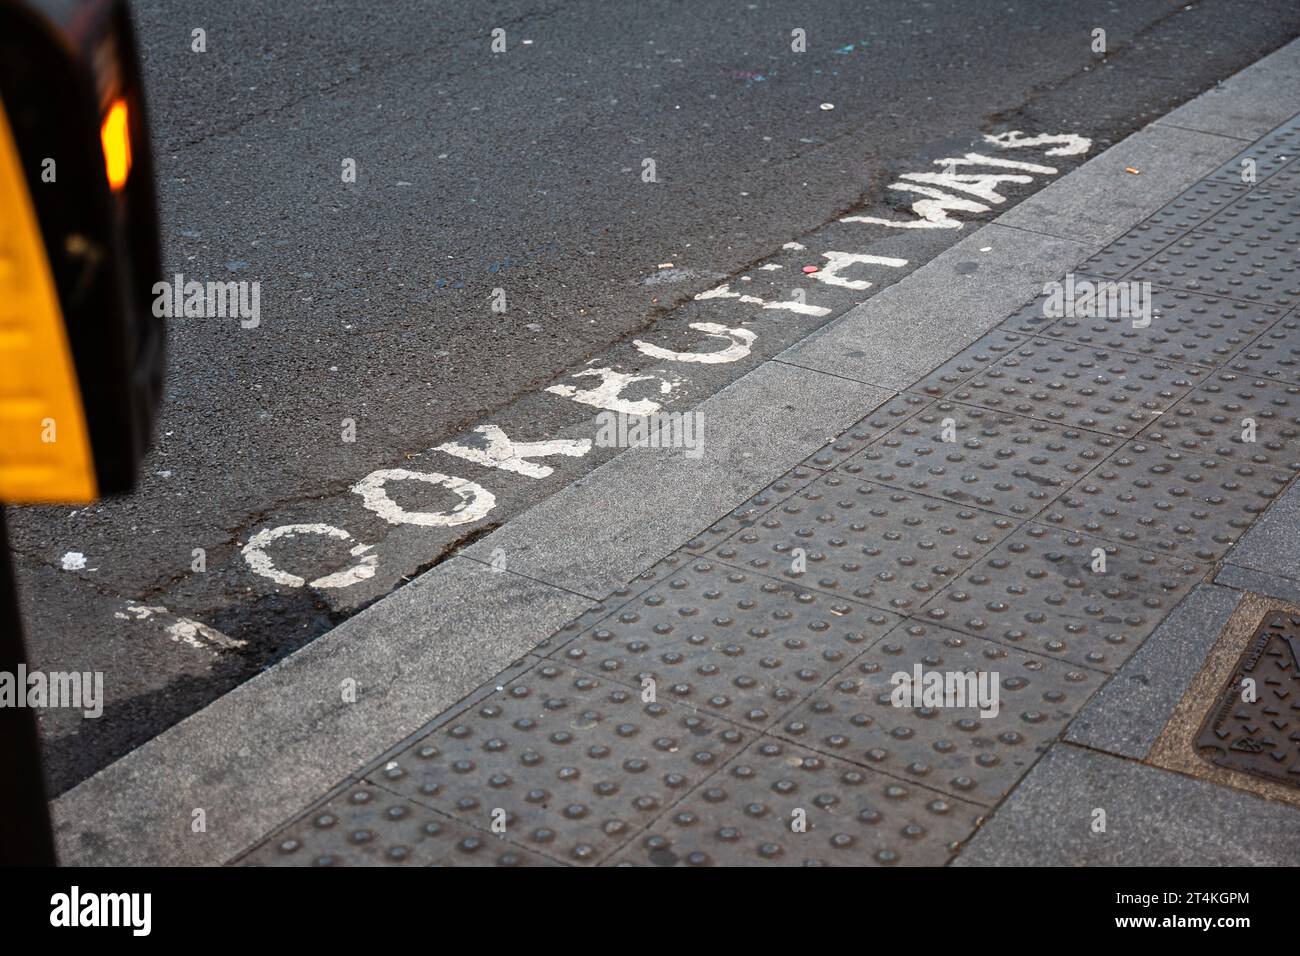 'Look Both Ways' letters are painted on the New Oxford Street. Pedestrian crossing in the London Borough of Camden, UK. Stock Photo